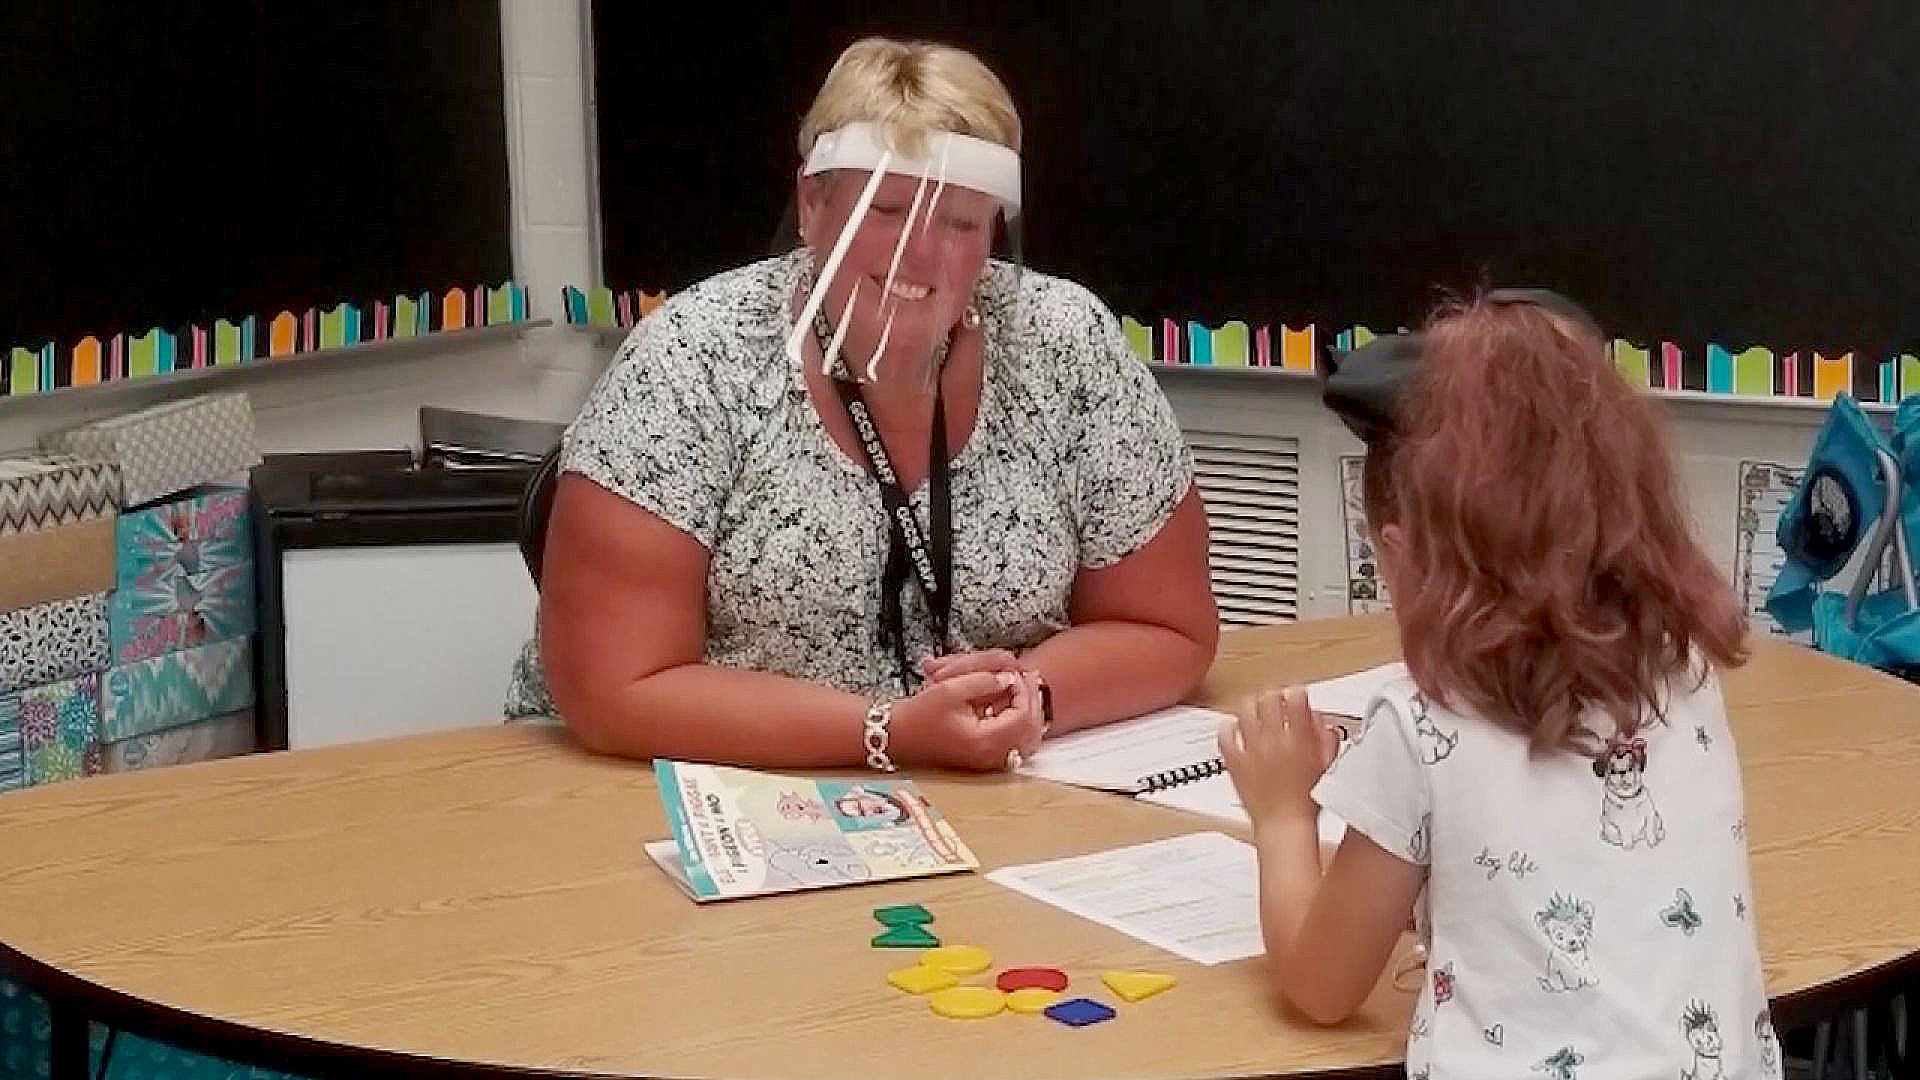 The Indiana school district held its first day of in-person classes on July 29. Students could choose between in-person and virtual instruction.